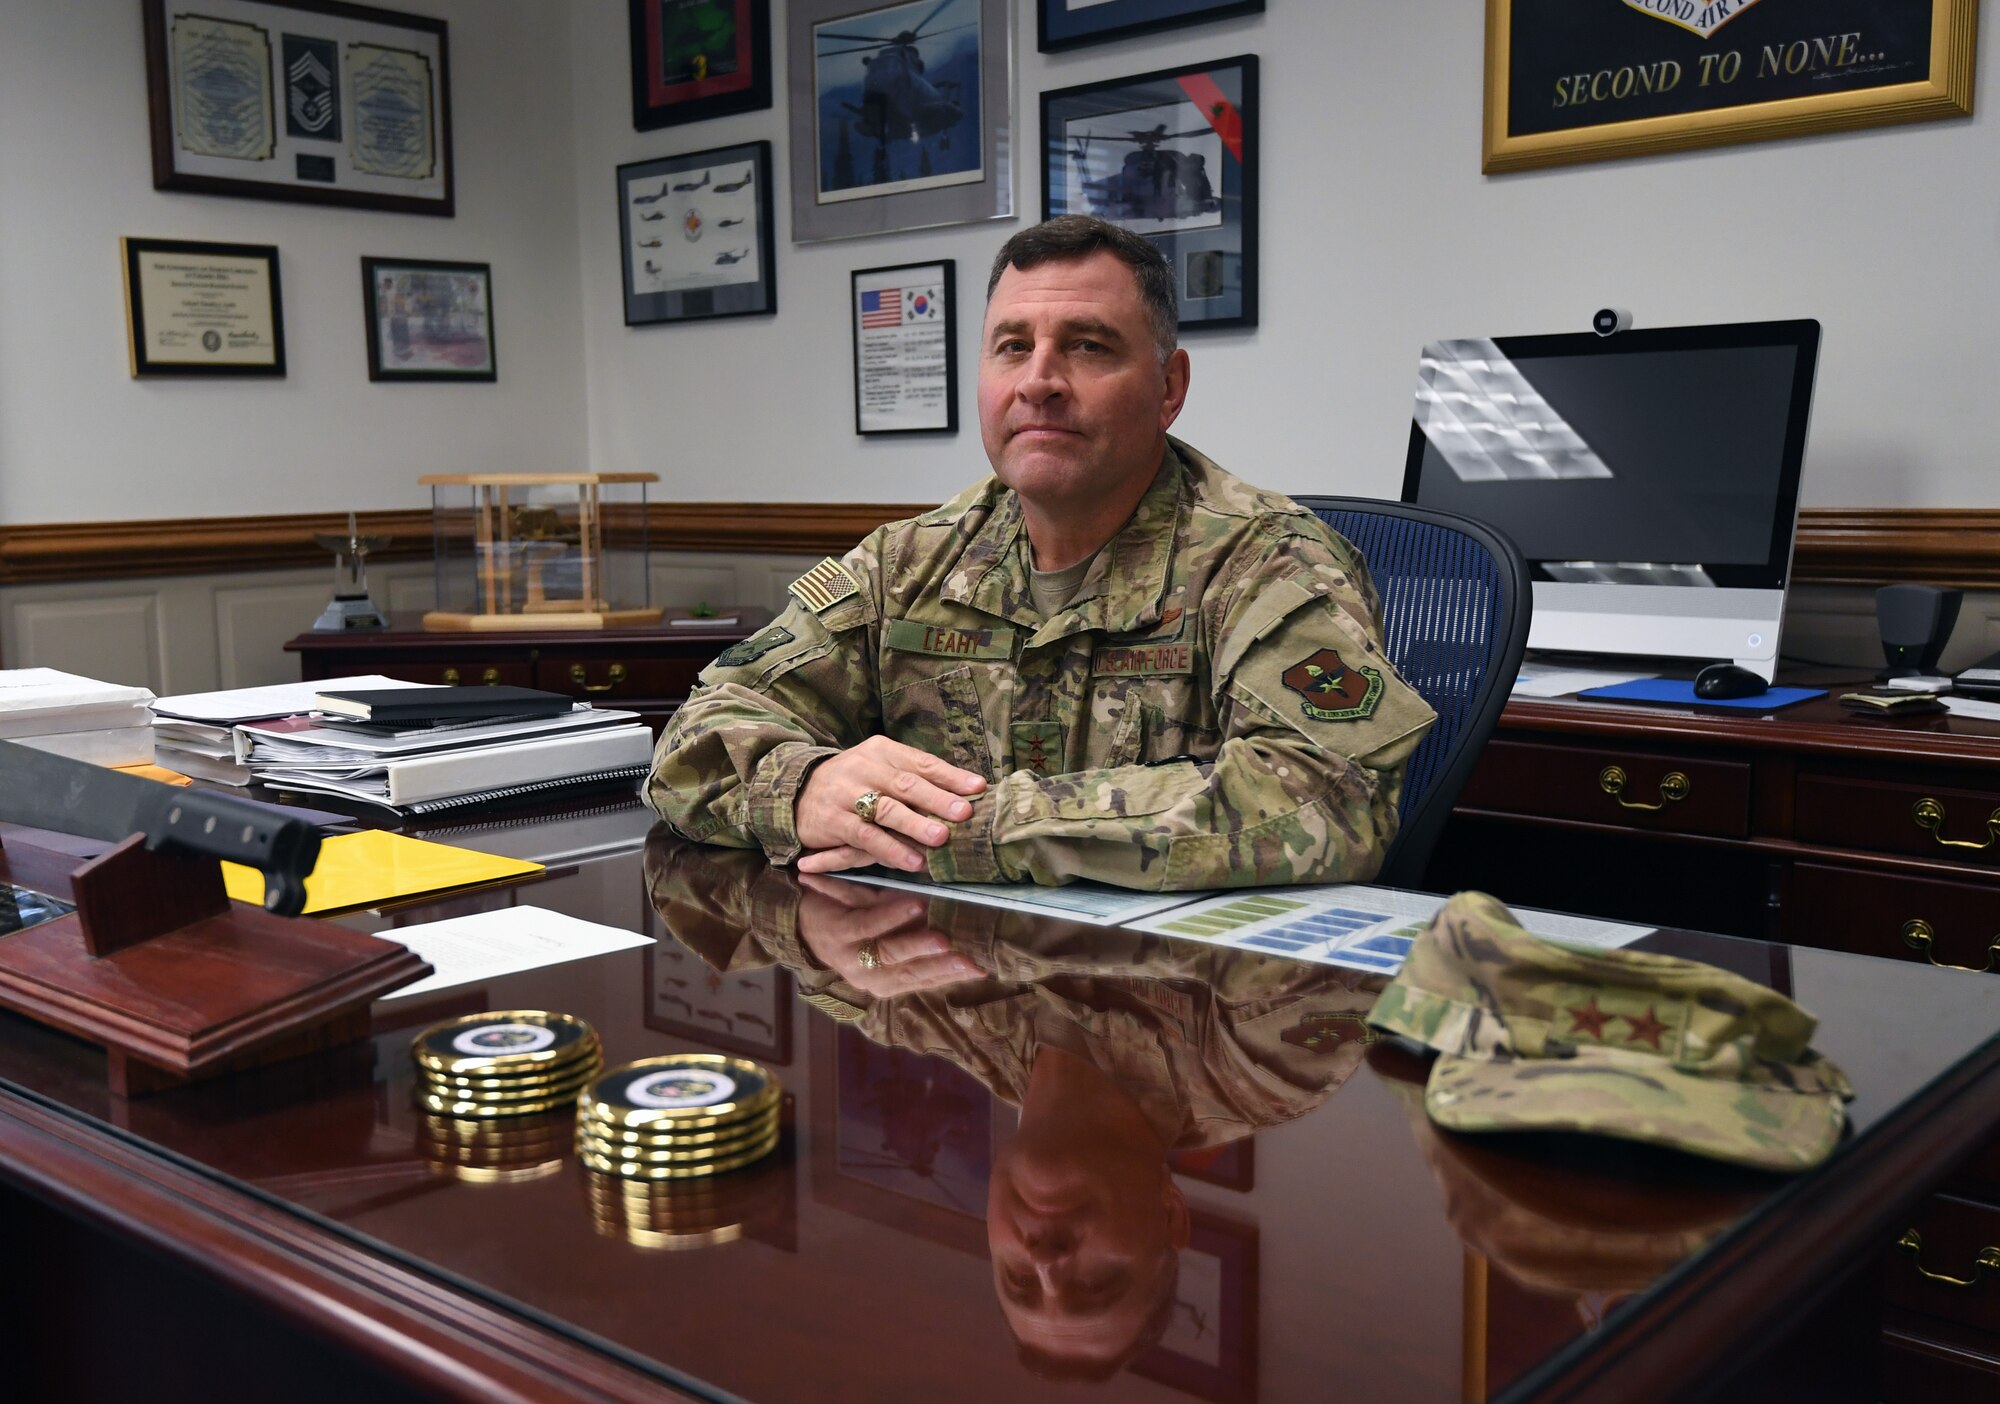 U.S. Air Force Maj. Gen. Timothy Leahy, Second Air Force commander, poses for a photo at his desk on Keesler Air Force Base, Mississippi, Aug. 14, 2019. Leahy will retire on Dec. 1 with more than 34 years of military service. Throughout his career, Leahy held positions at the major command, sub-unified combatant command and geographic and functional combatant command levels. He also commanded at the squadron, wing, center and numbered Air Force level. Additionally, Leahy is a command pilot with more than 3,200 hours of flight time, primarily in Special Operations Forces aircraft. (U.S. Air Force photo by Kemberly Groue)